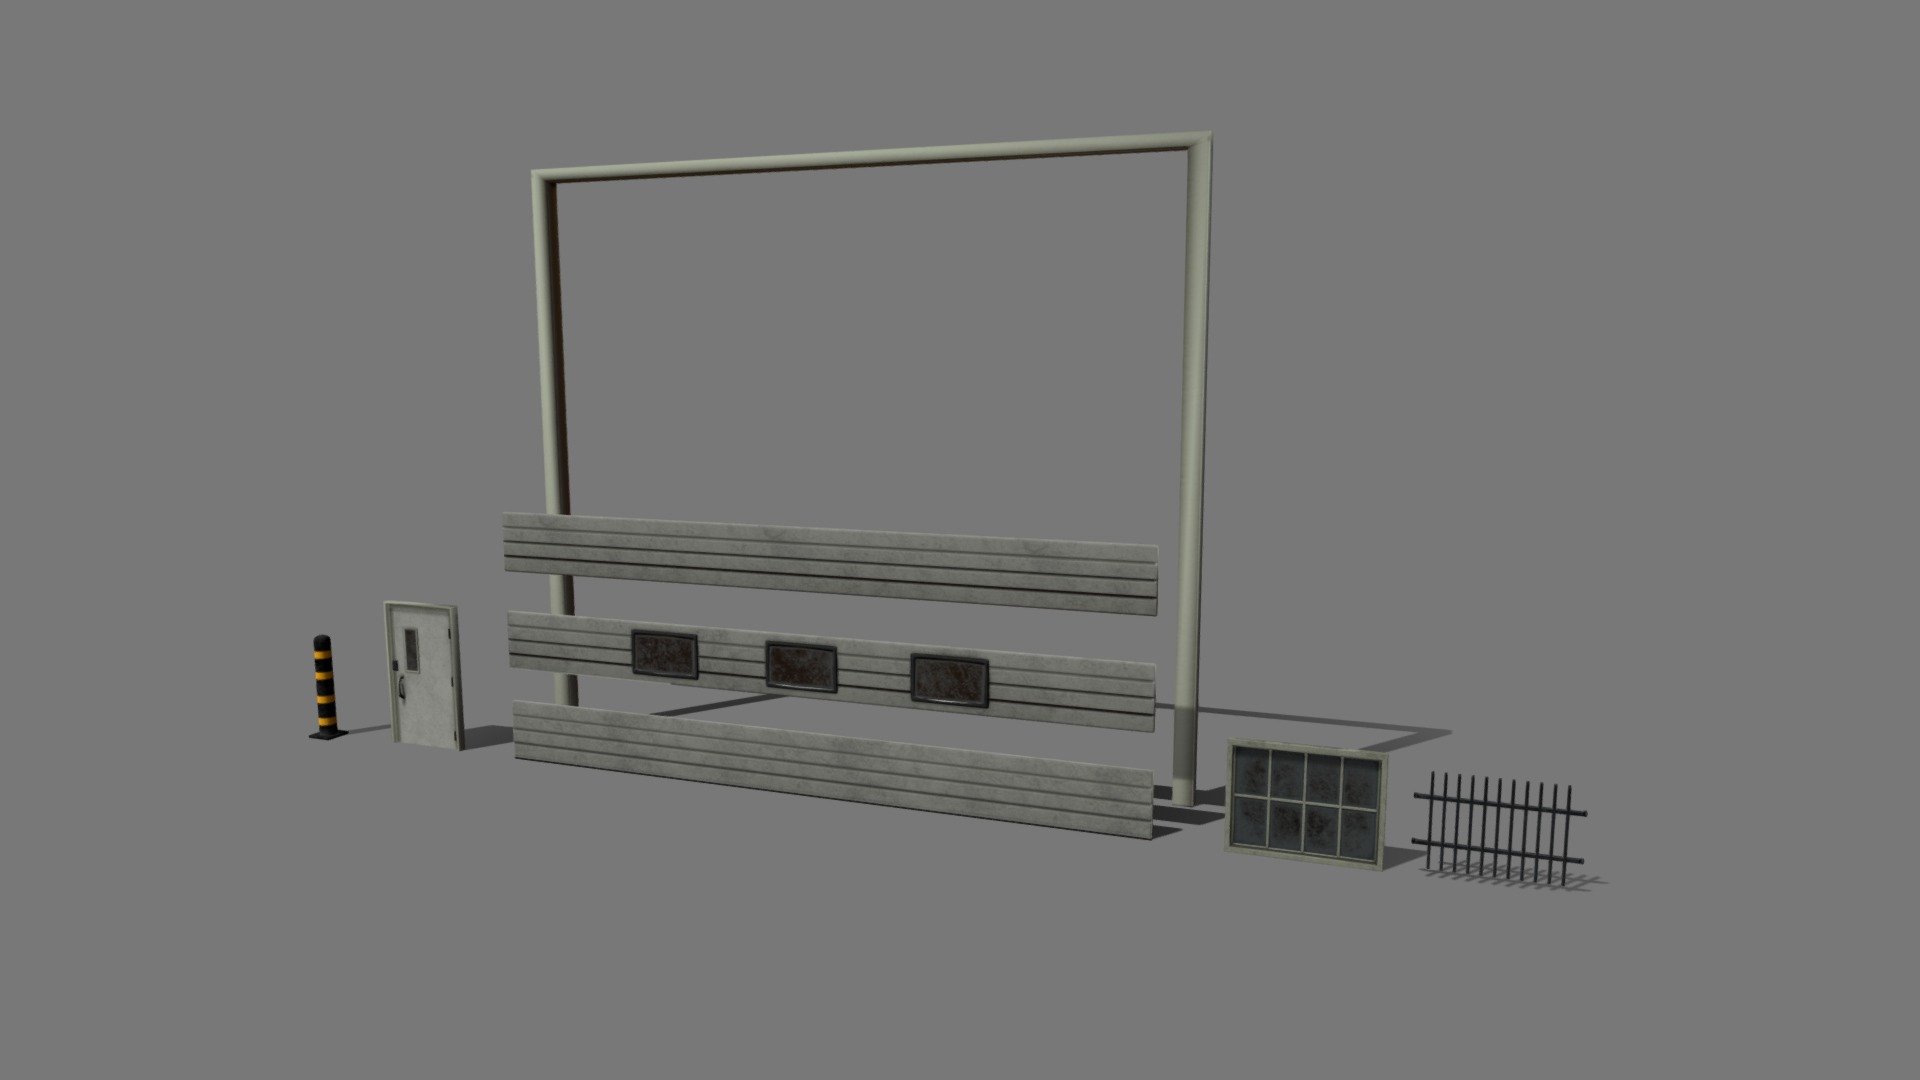 Here is a building kit for some worksite doors and windows I created as part of my final major university game project called Carnage.

This is the version that just shows the kit in it's parts 3d model